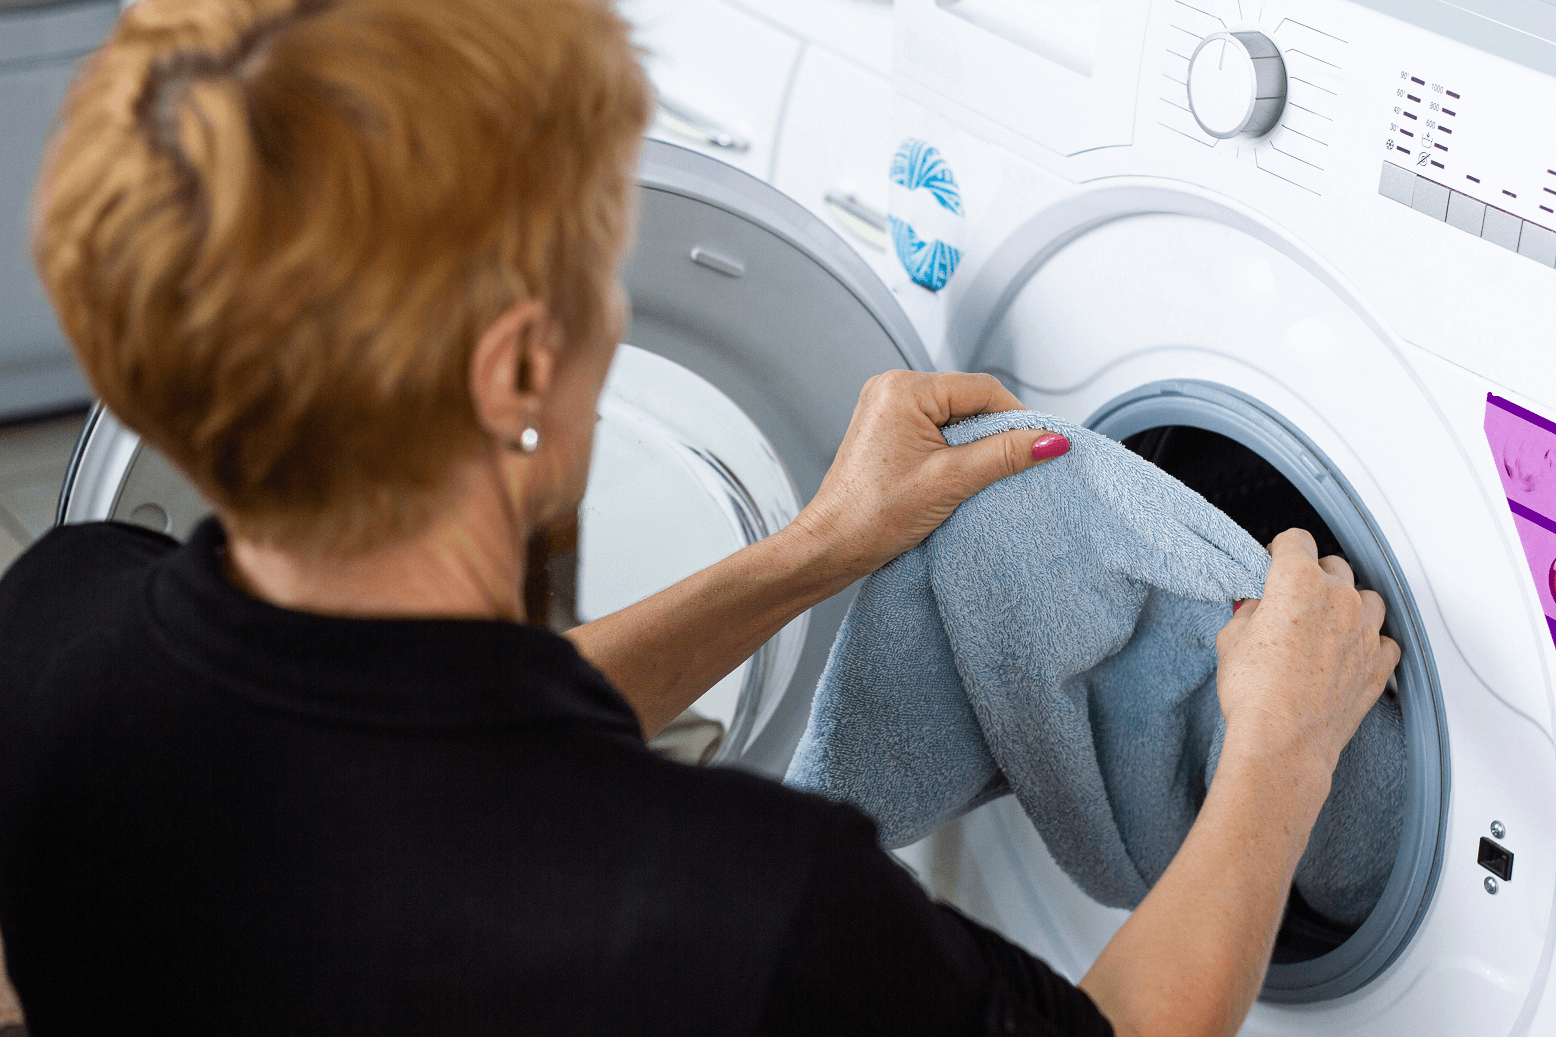 home-laundry-house-cleaning-2022-11-09-18-02-44-utc